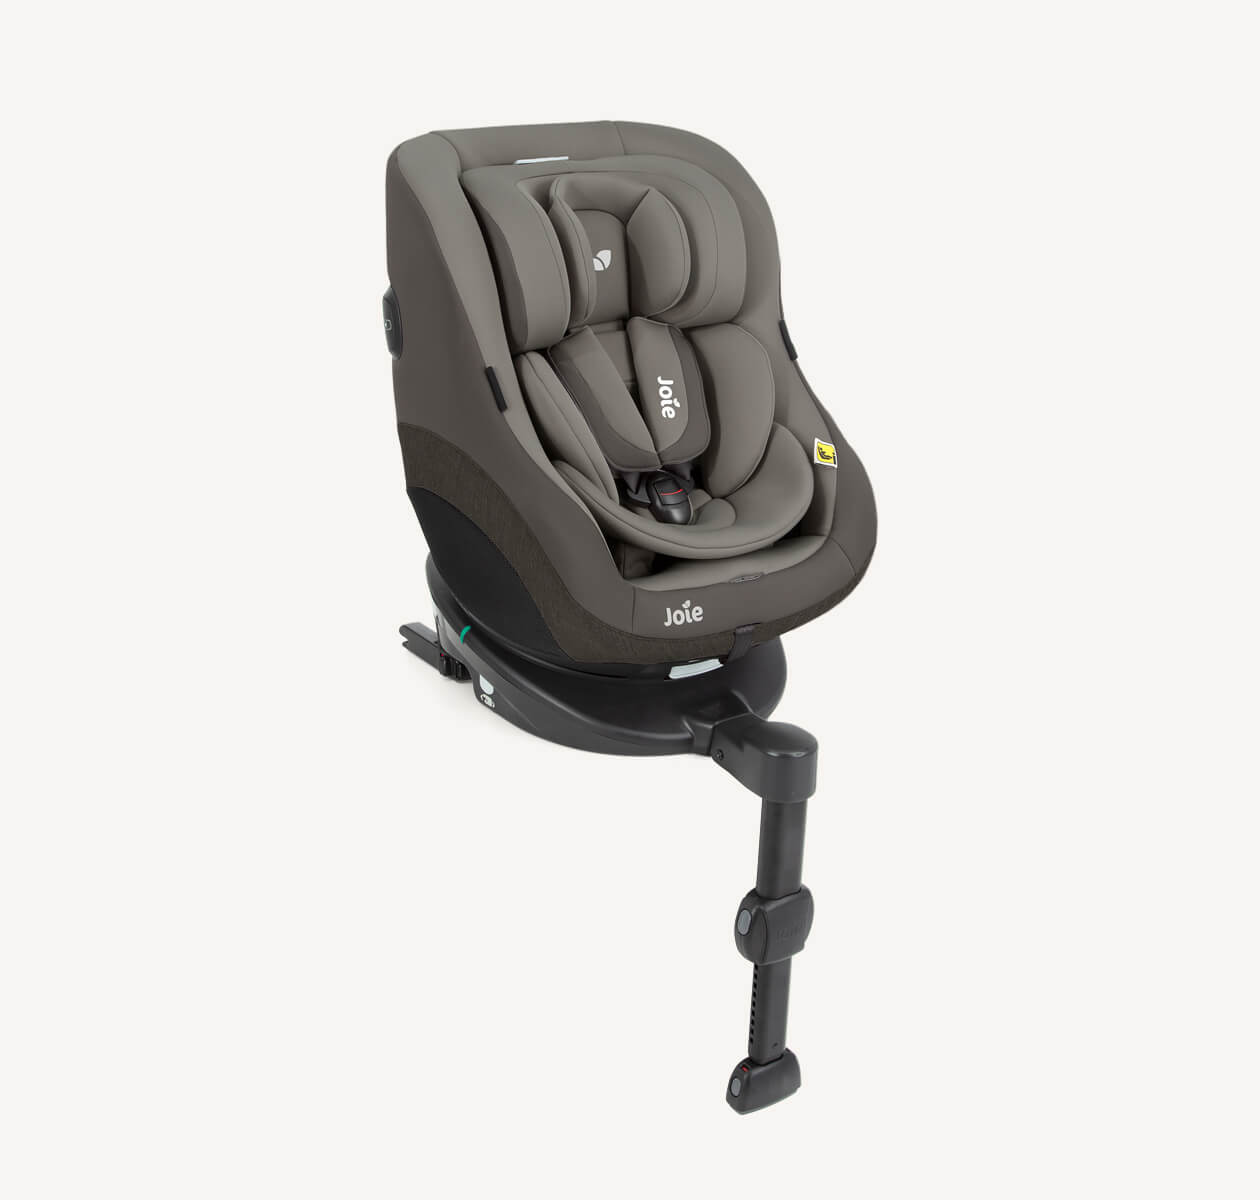   Joie spin 360 GTi car seat in two-tone gray at an angle.